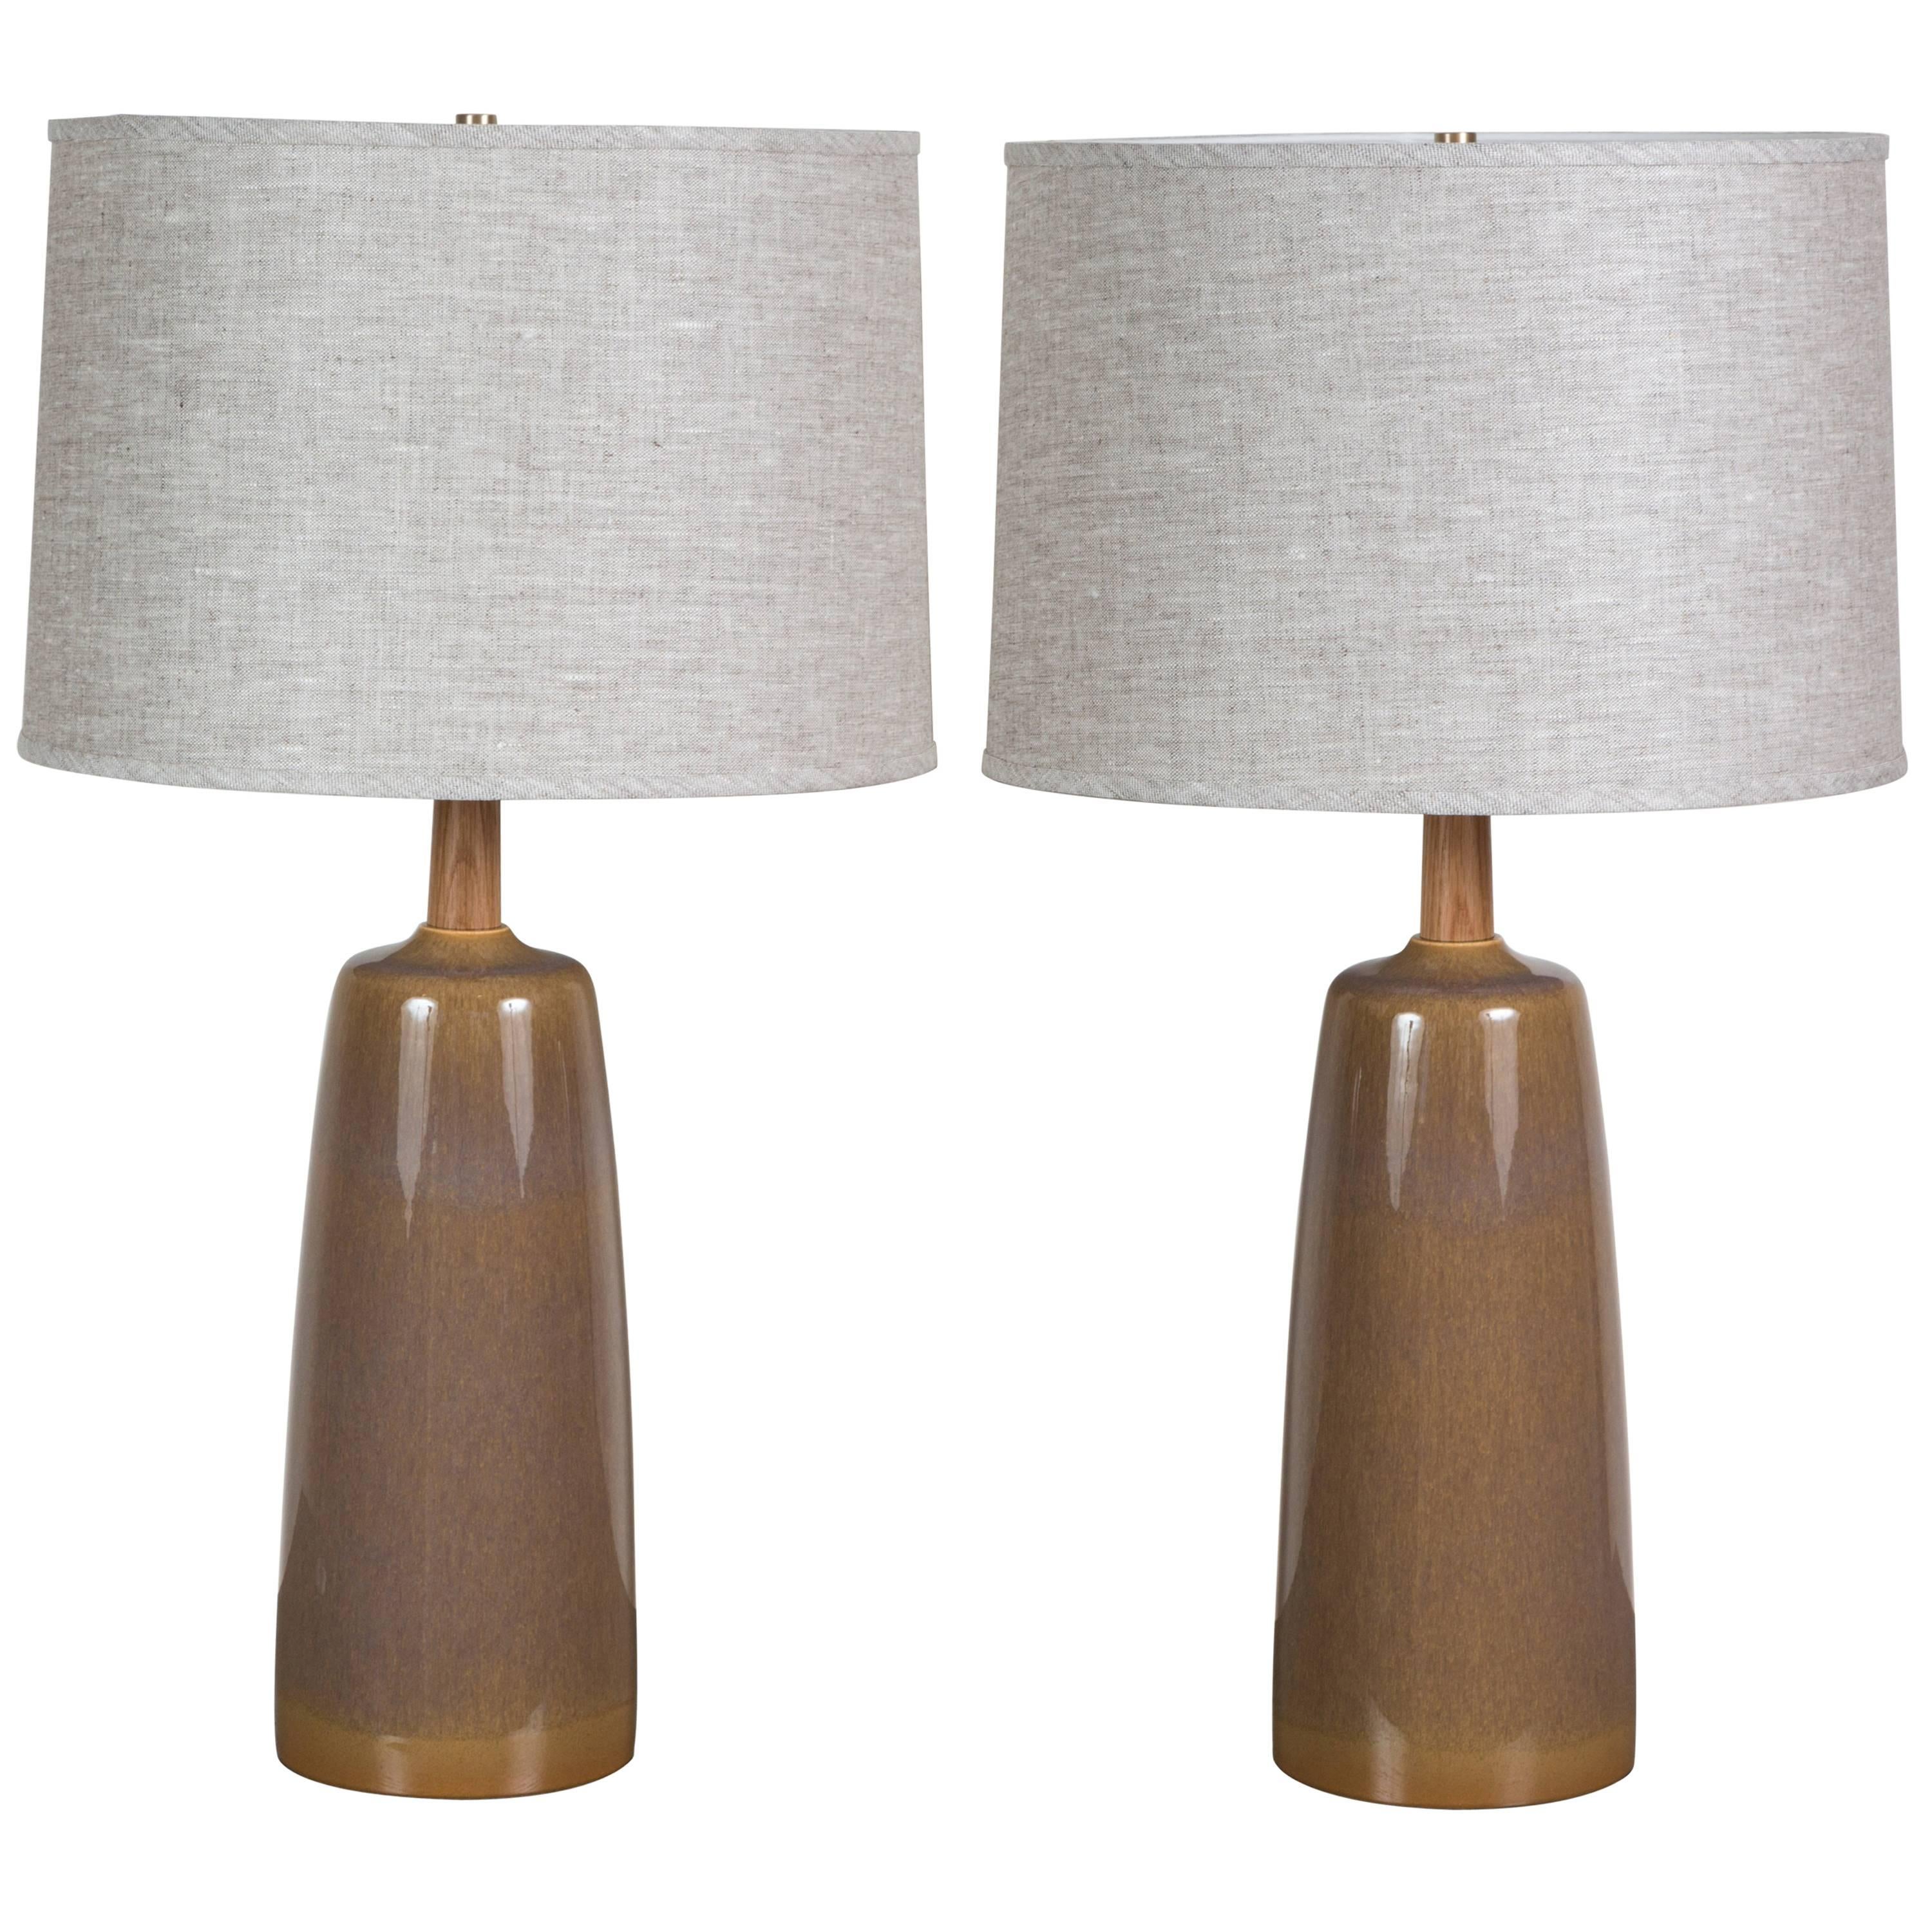 Pair of Tor by Stone and Sawyer for Lawson-Fenning